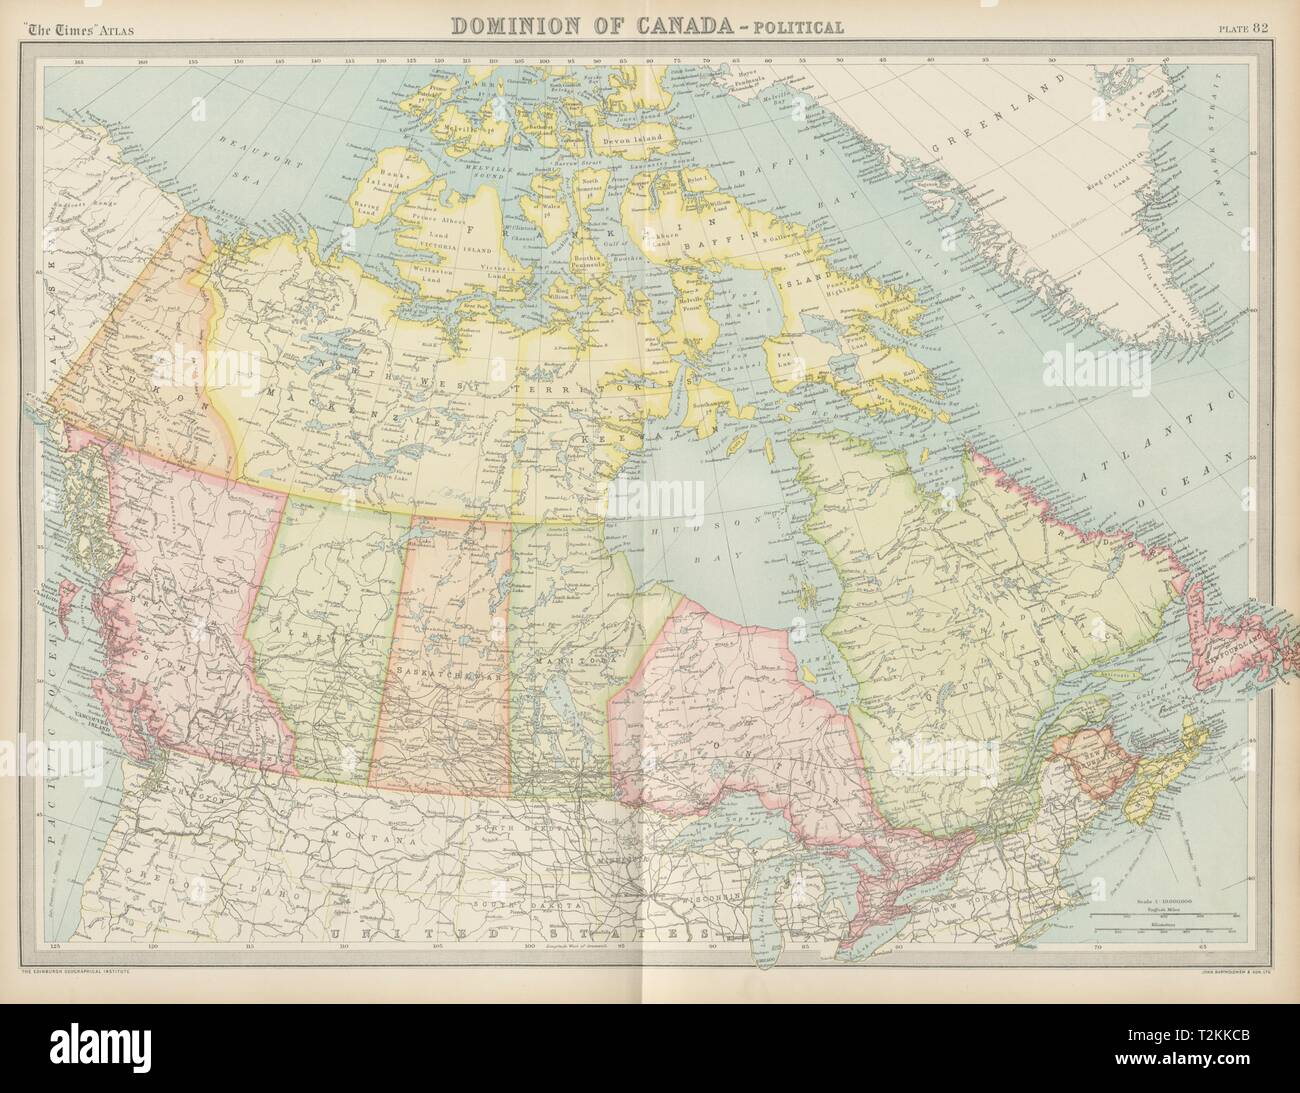 Dominion of Canada - Political. Provinces & territories. THE TIMES 1922 map Stock Photo